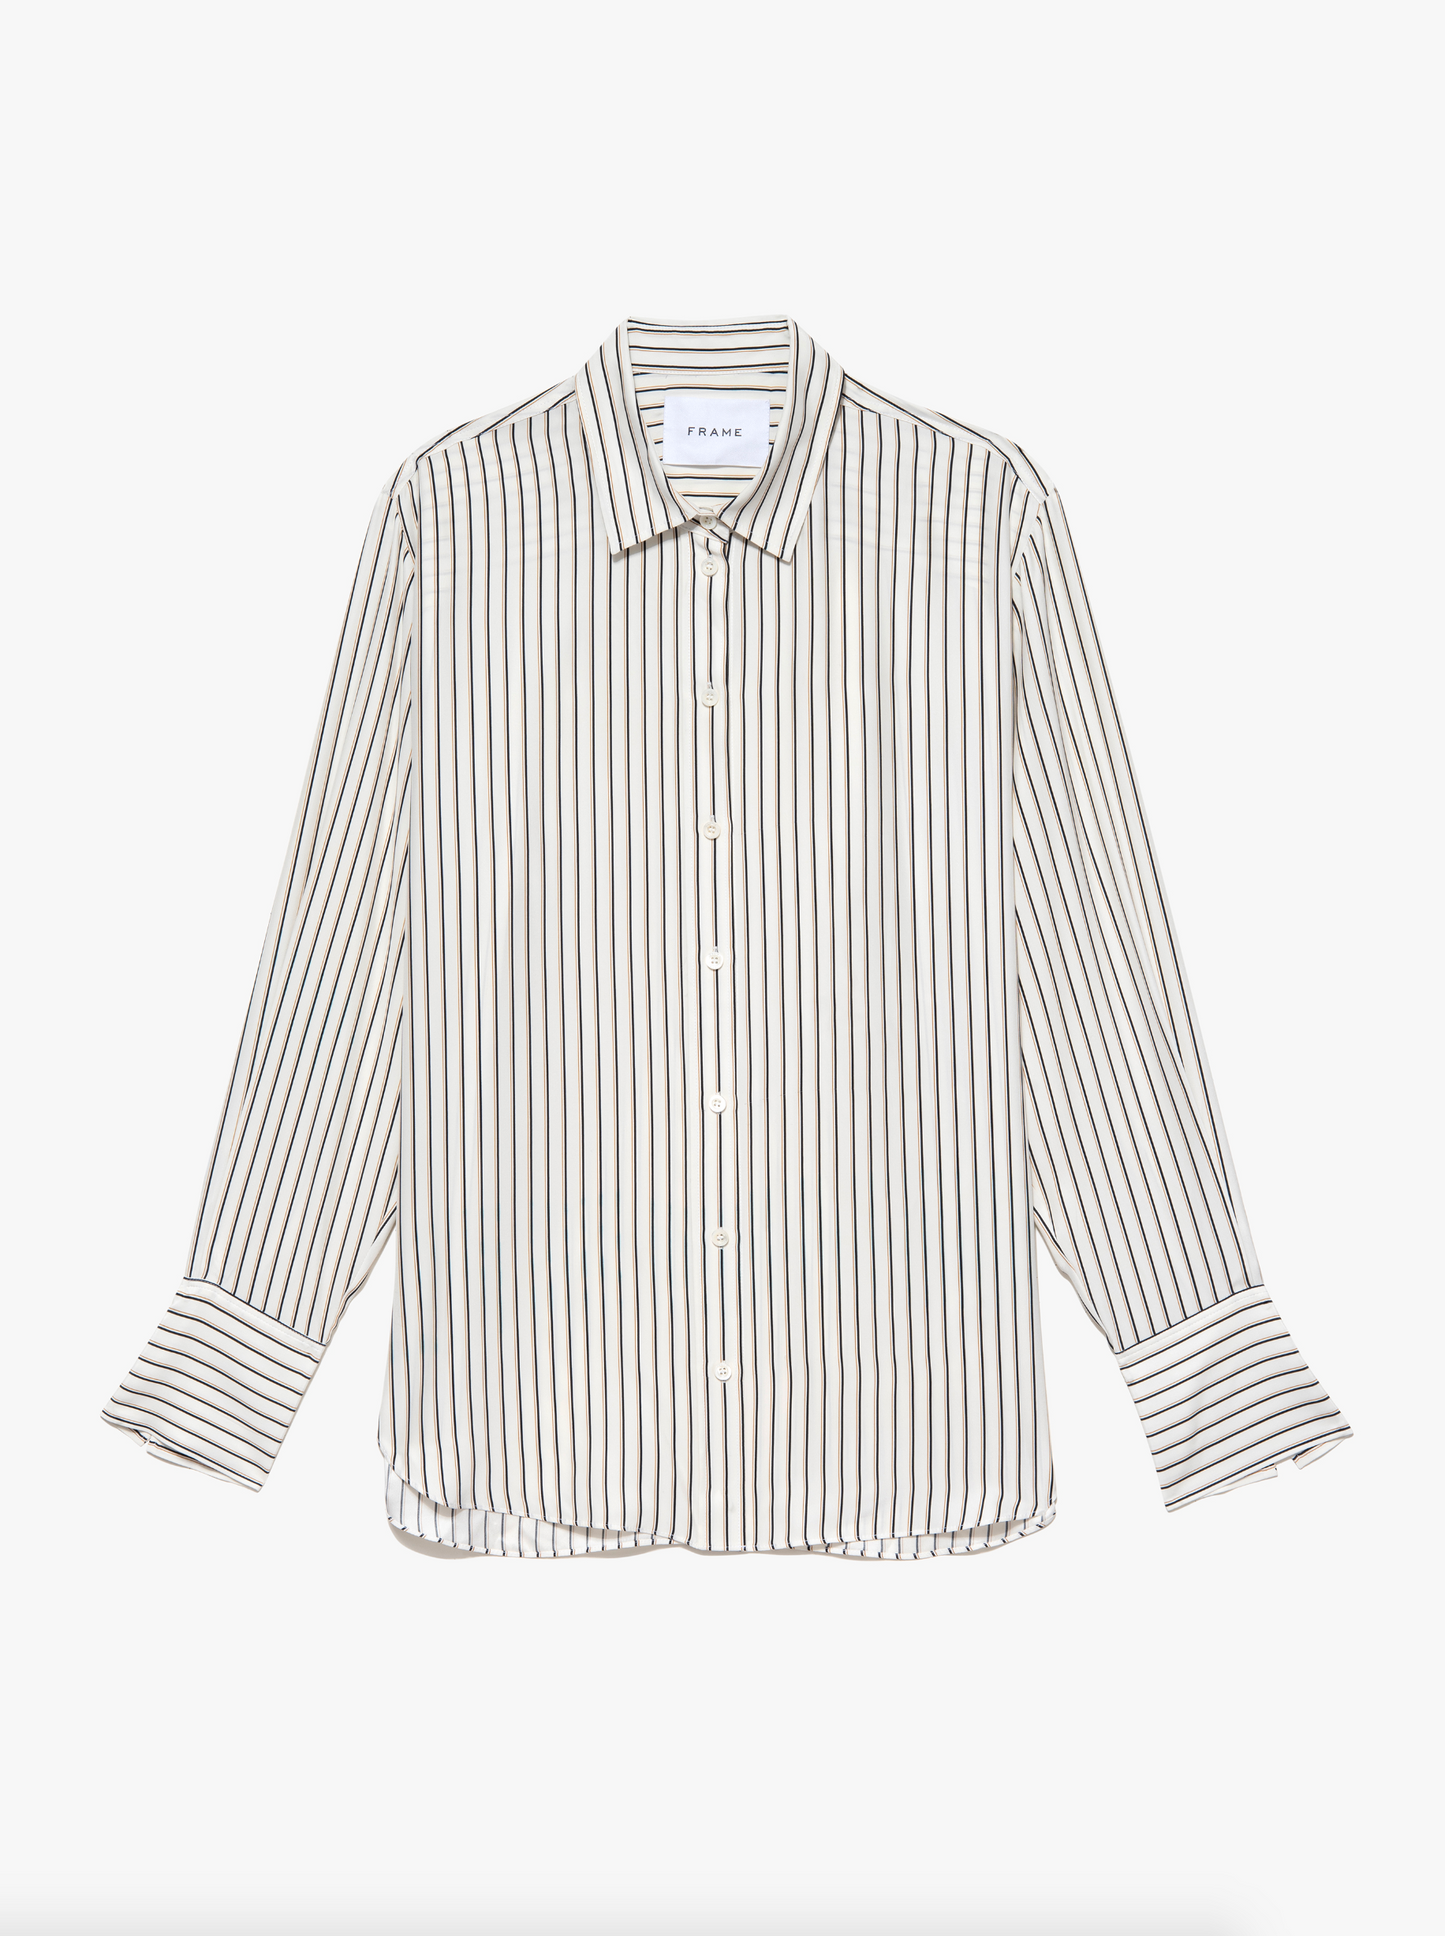 The Oversized Shirt 40% OFF